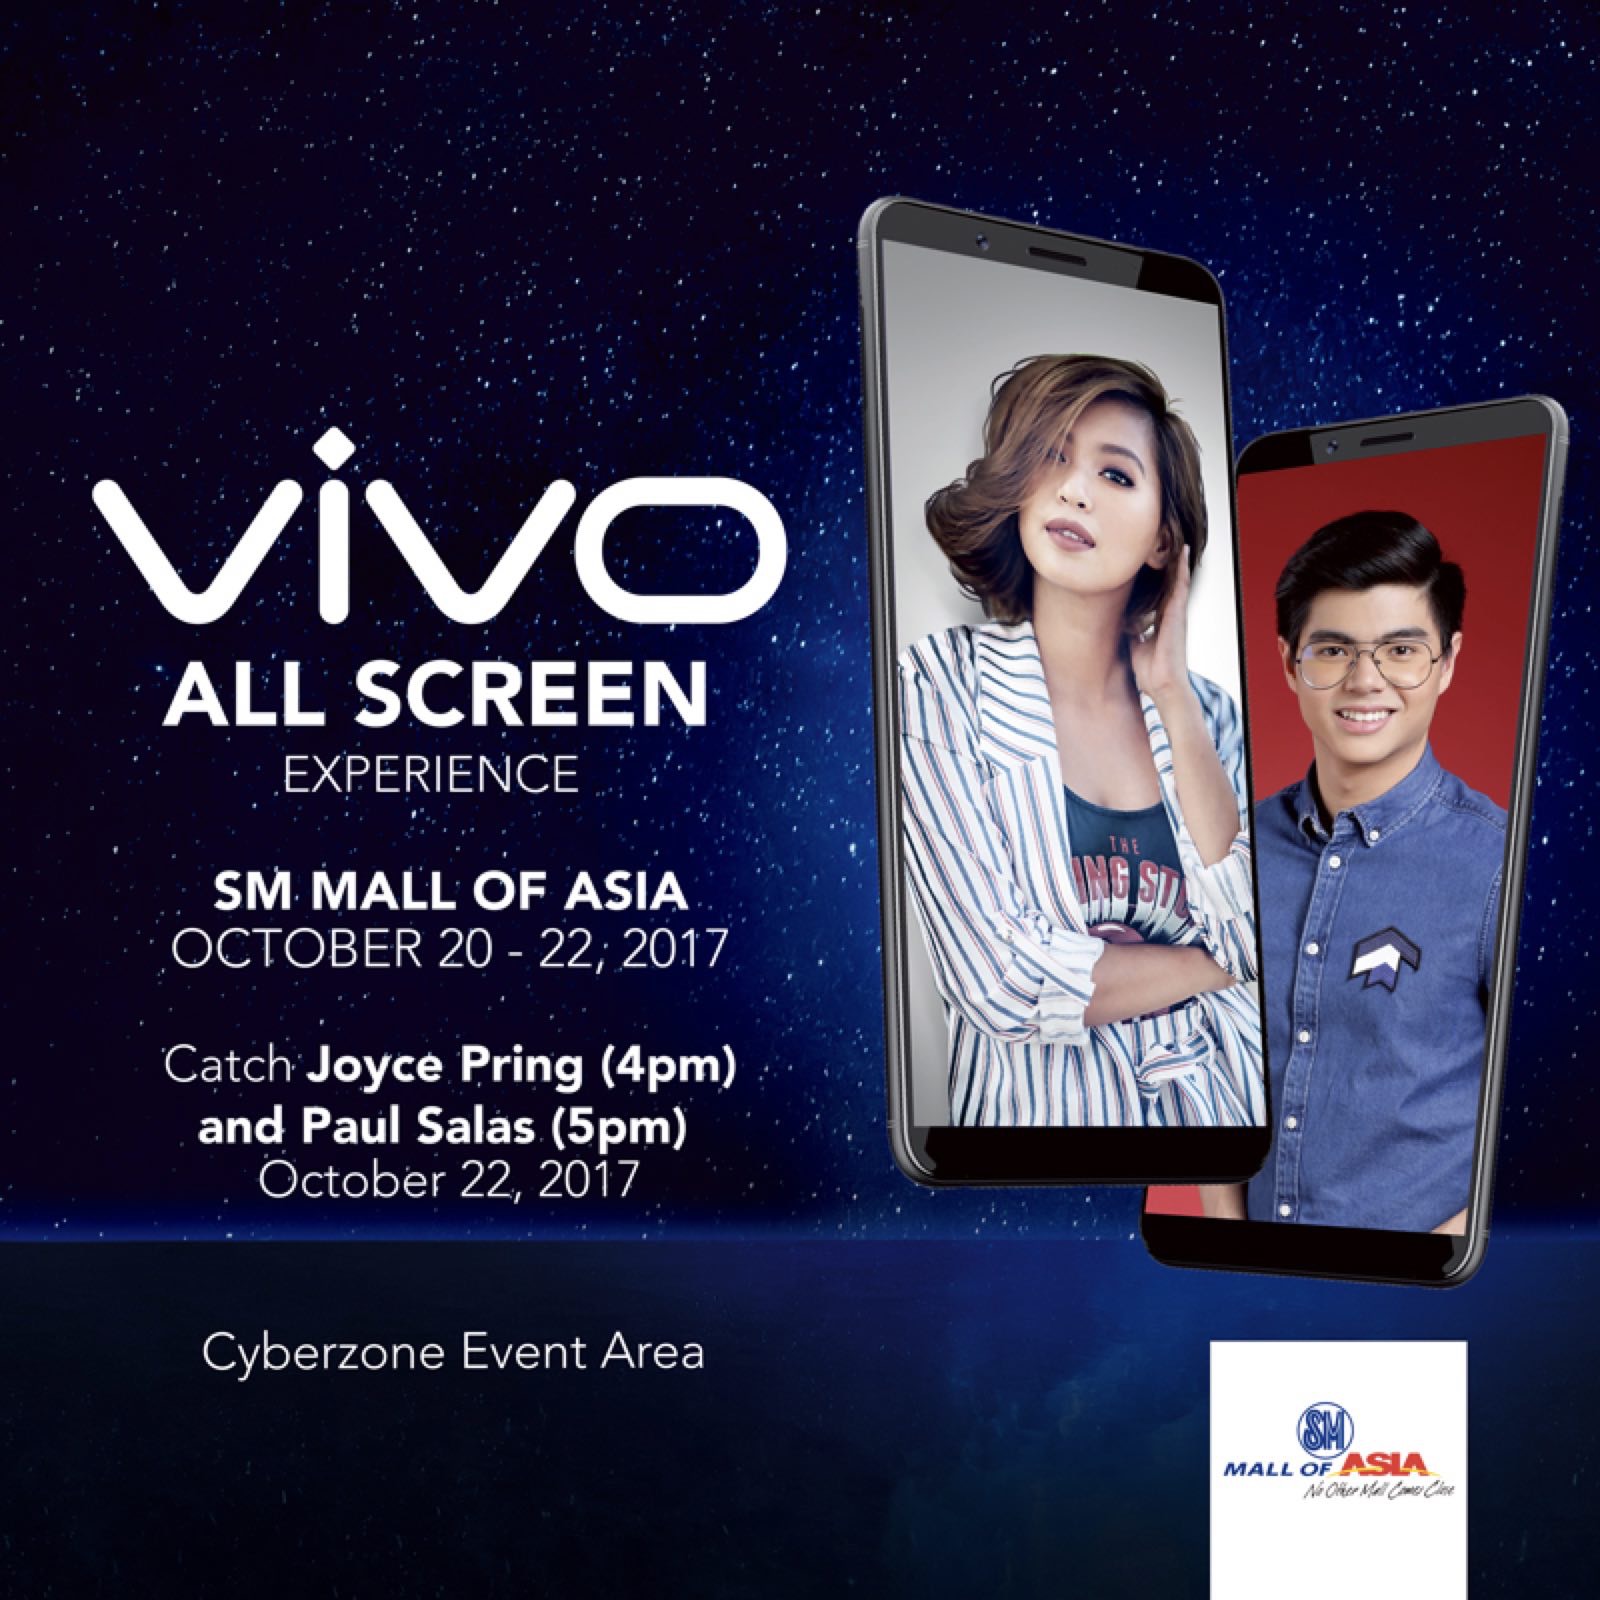 Catch the Vivo V7+ All Screen Experience Mall Tour at the SM Mall of Asia on October 20 to 22!